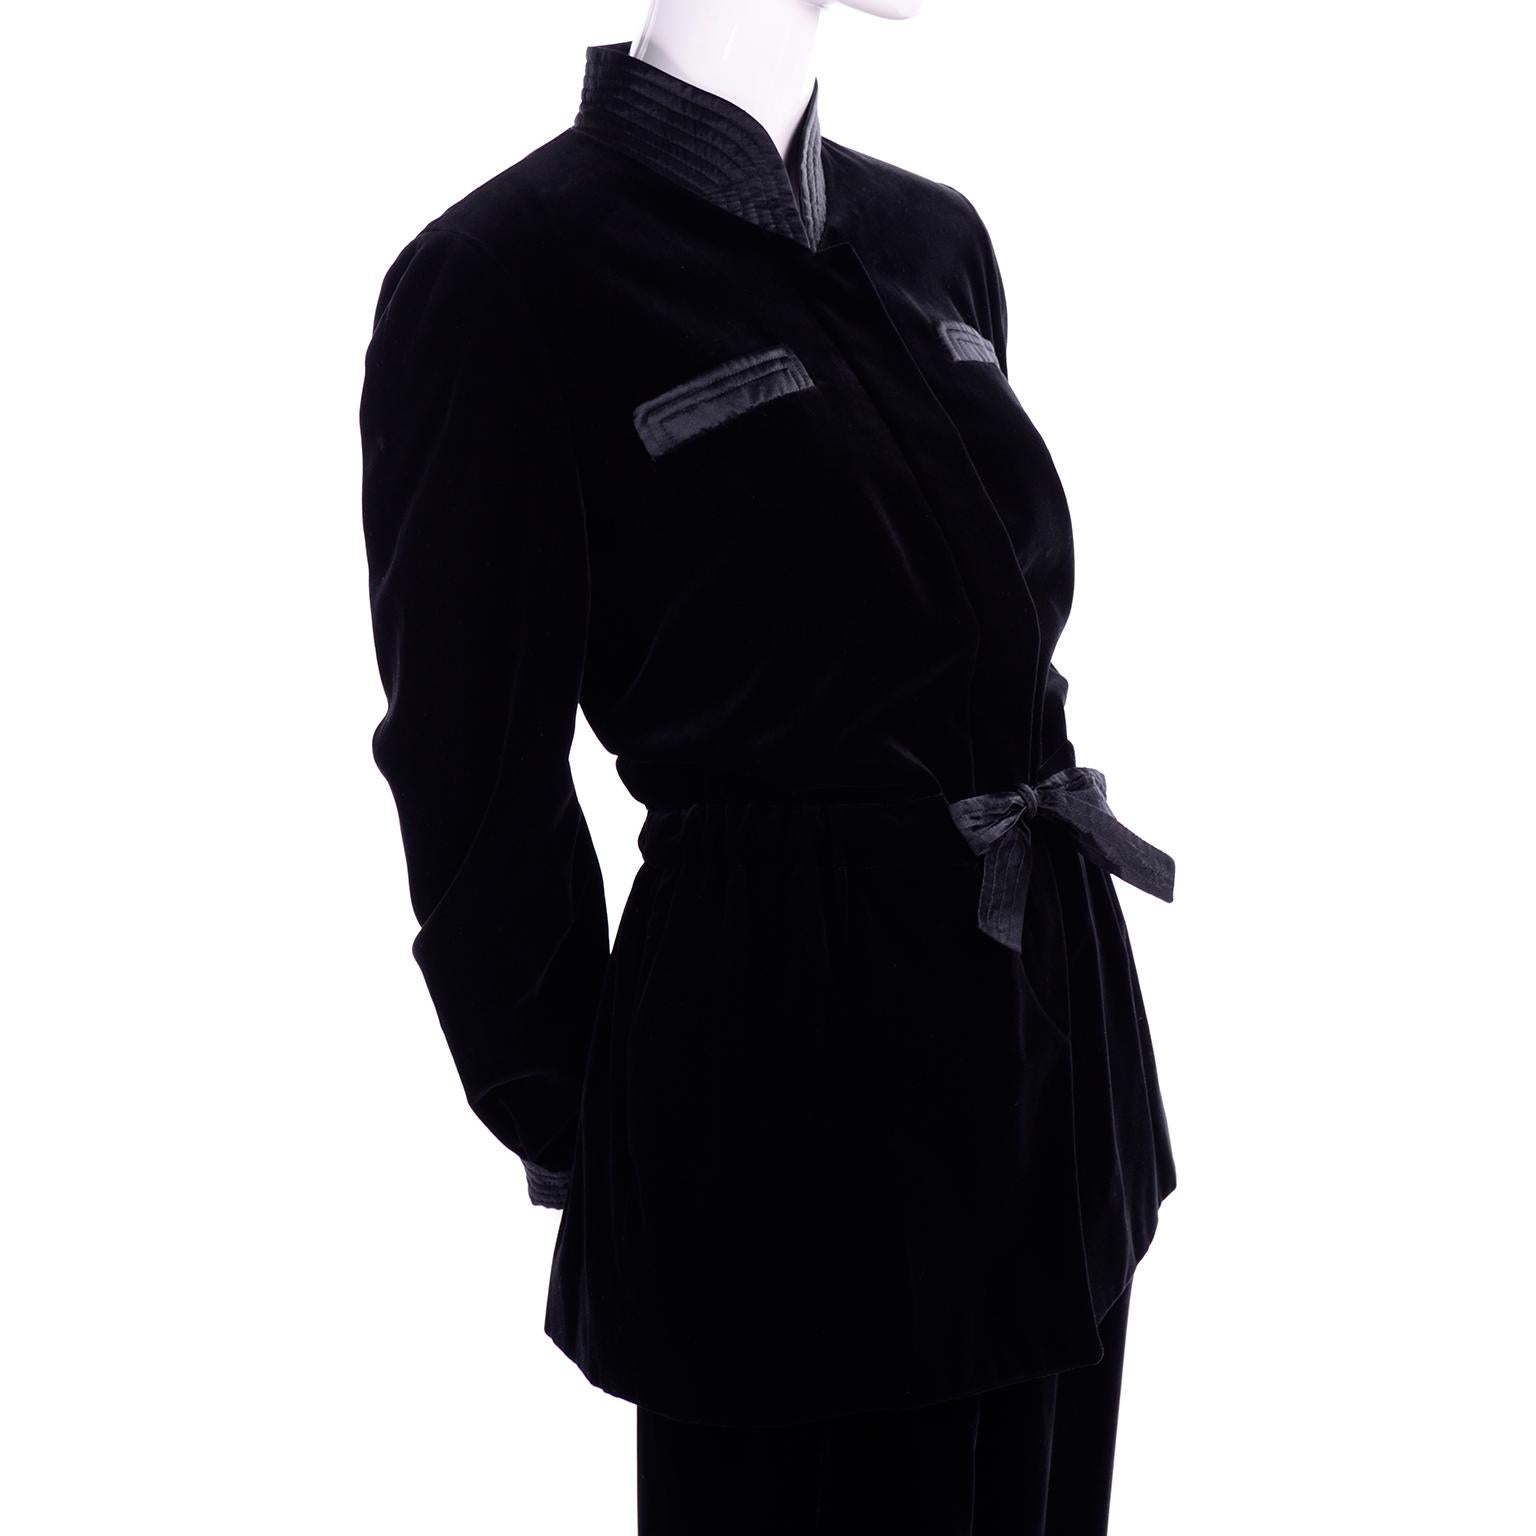 Vintage Valentino Boutique Black Velvet Skirt Suit With Satin Trim Size 6 In Excellent Condition For Sale In Portland, OR